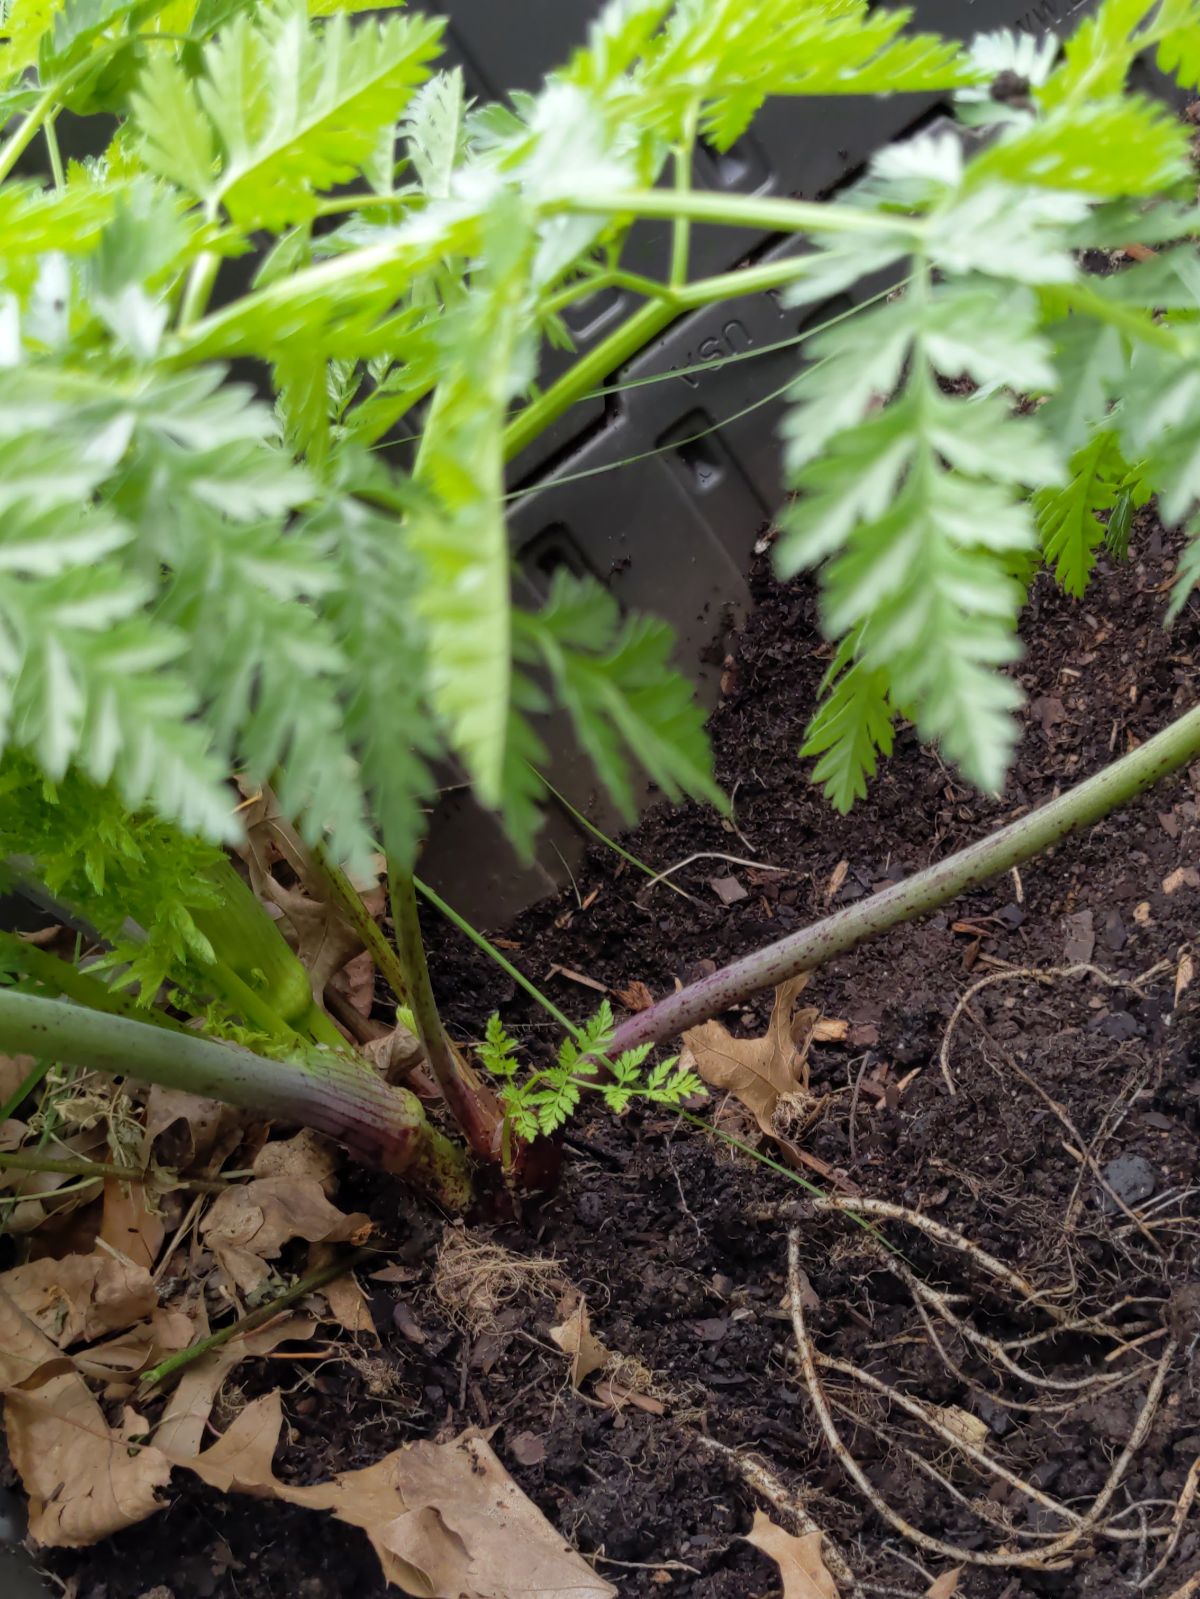 Bright green poison hemlock leaves growing from the base of the purple stemmed plant